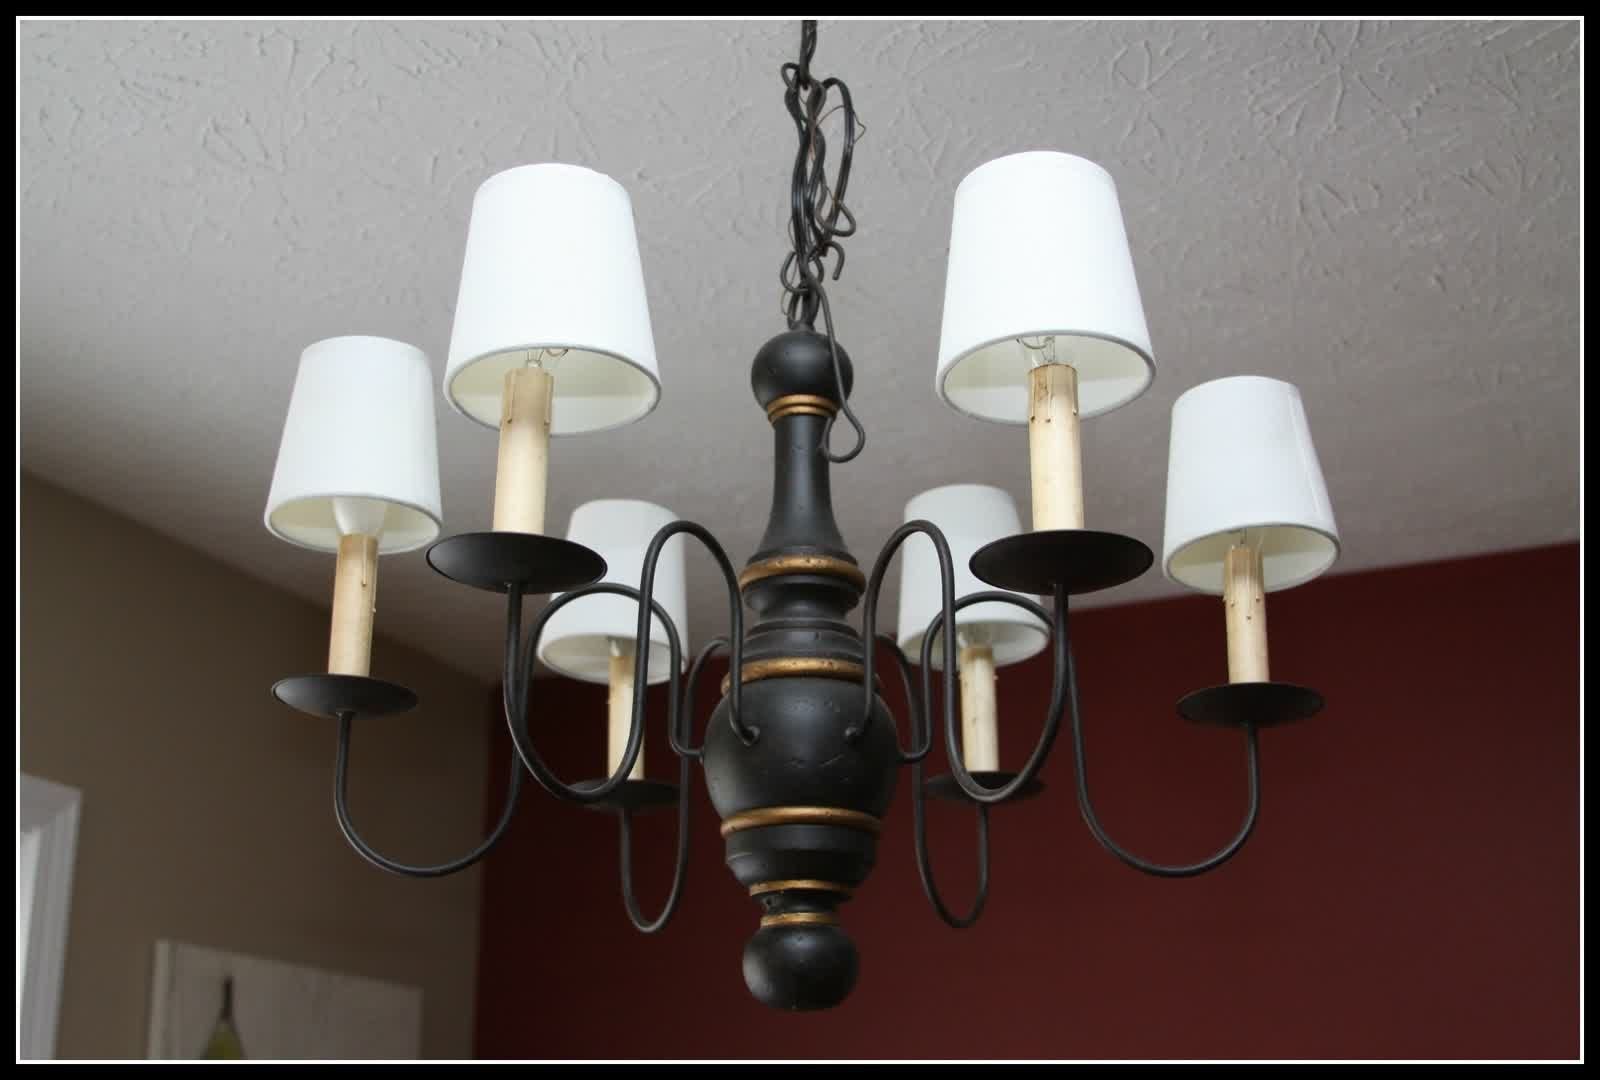 Chandelier New York Man Isis Popular Now Jerry Sandusky Moved Out Regarding Lampshades For Chandeliers (View 10 of 25)